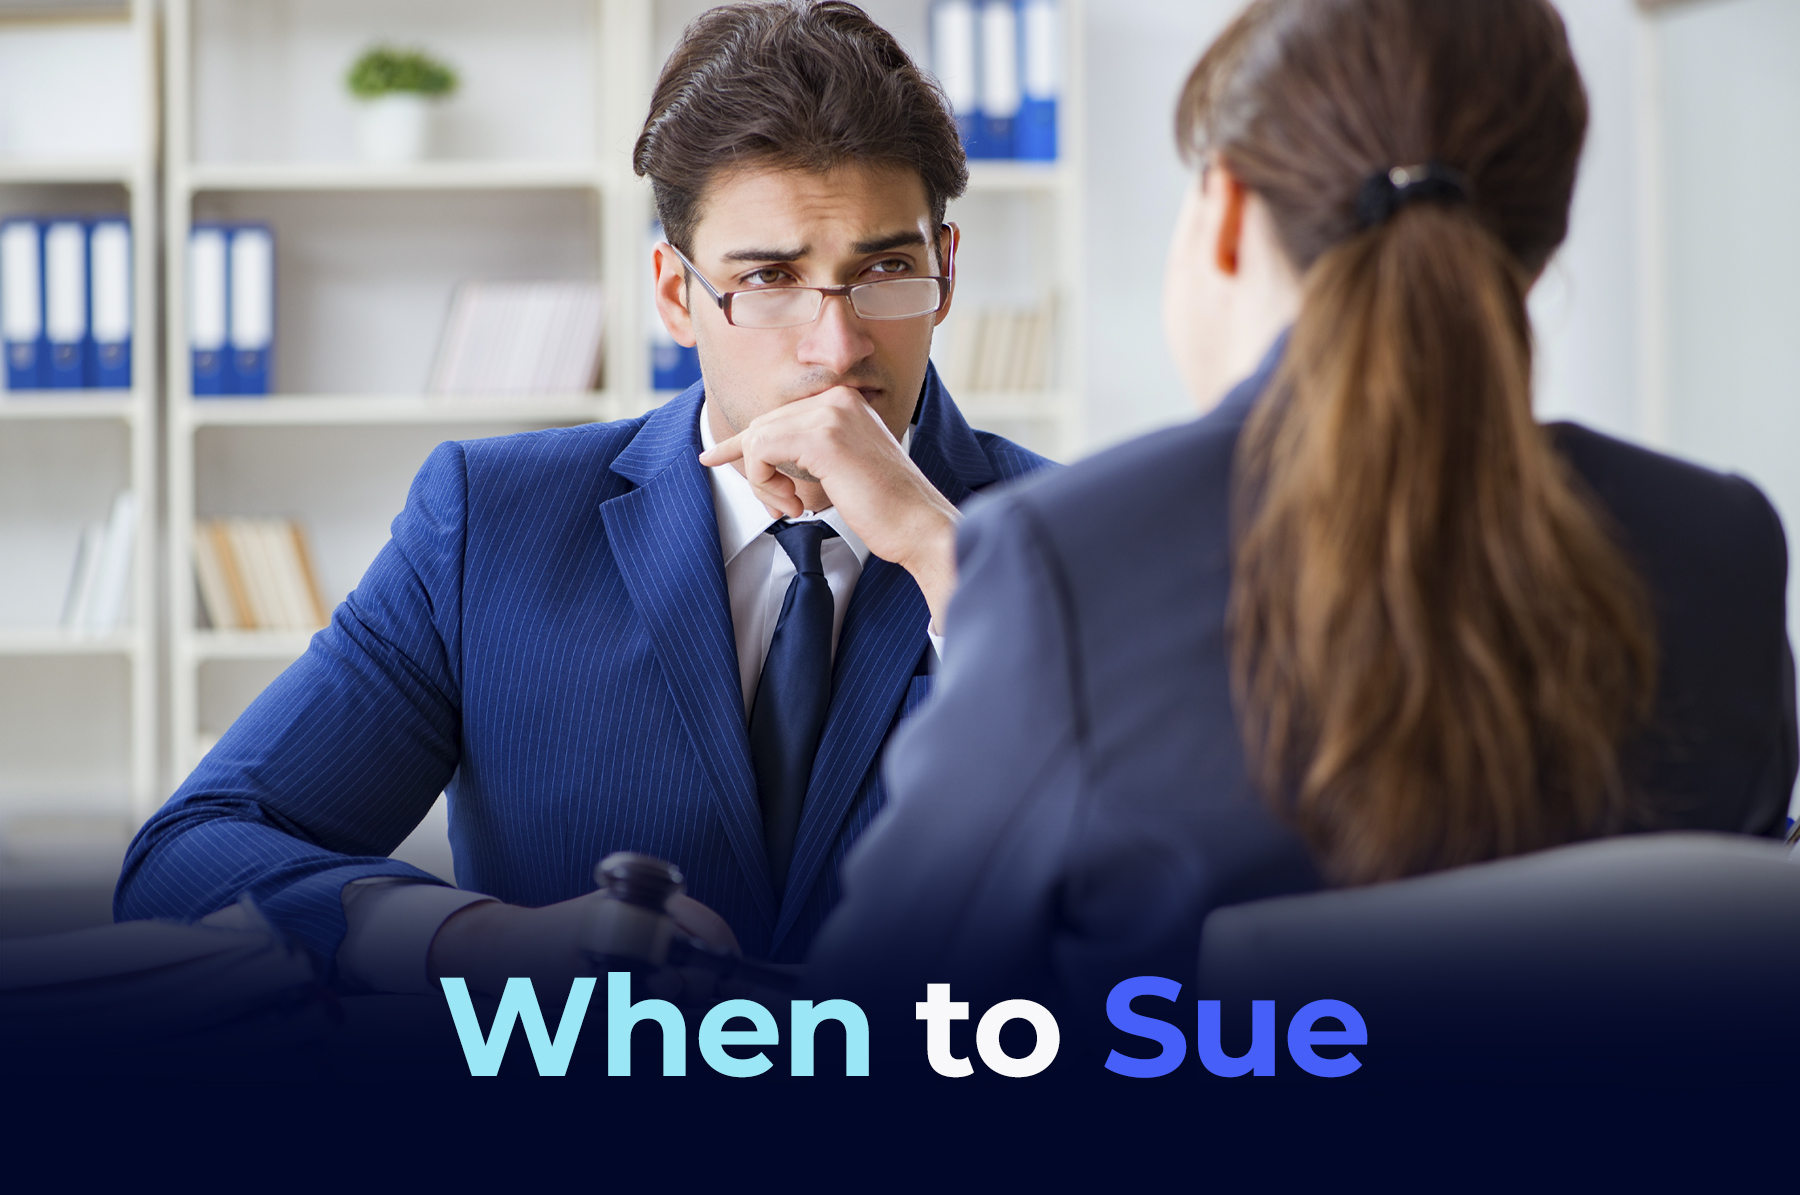 A lawyer and a client sitting in a office talking with the title "When to Sue"